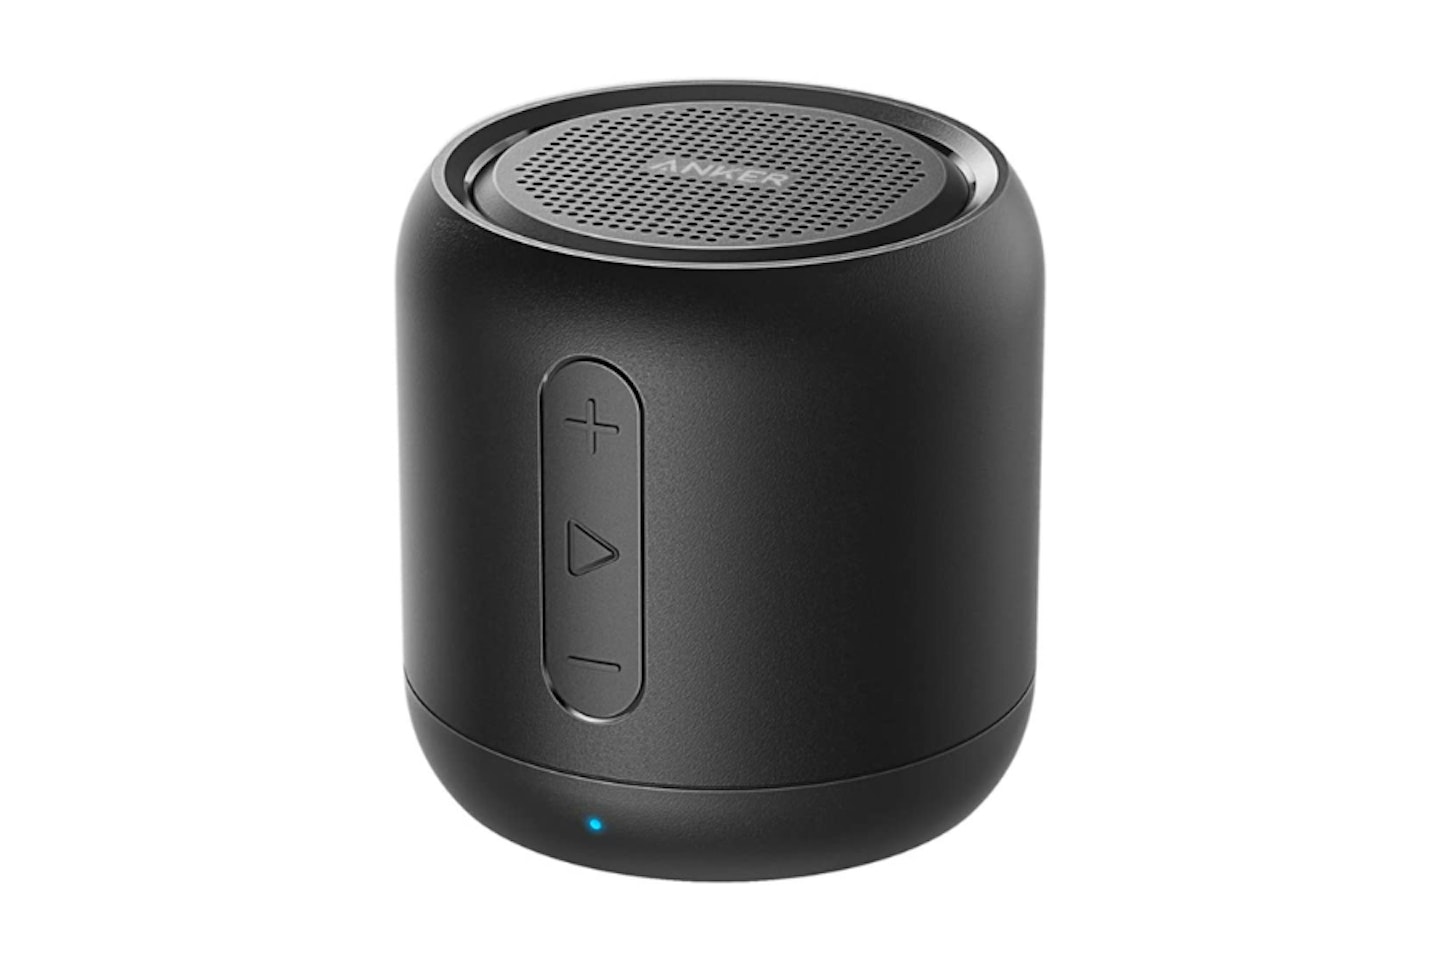 Anker Soundcore Mini -  one of the best portable speakers